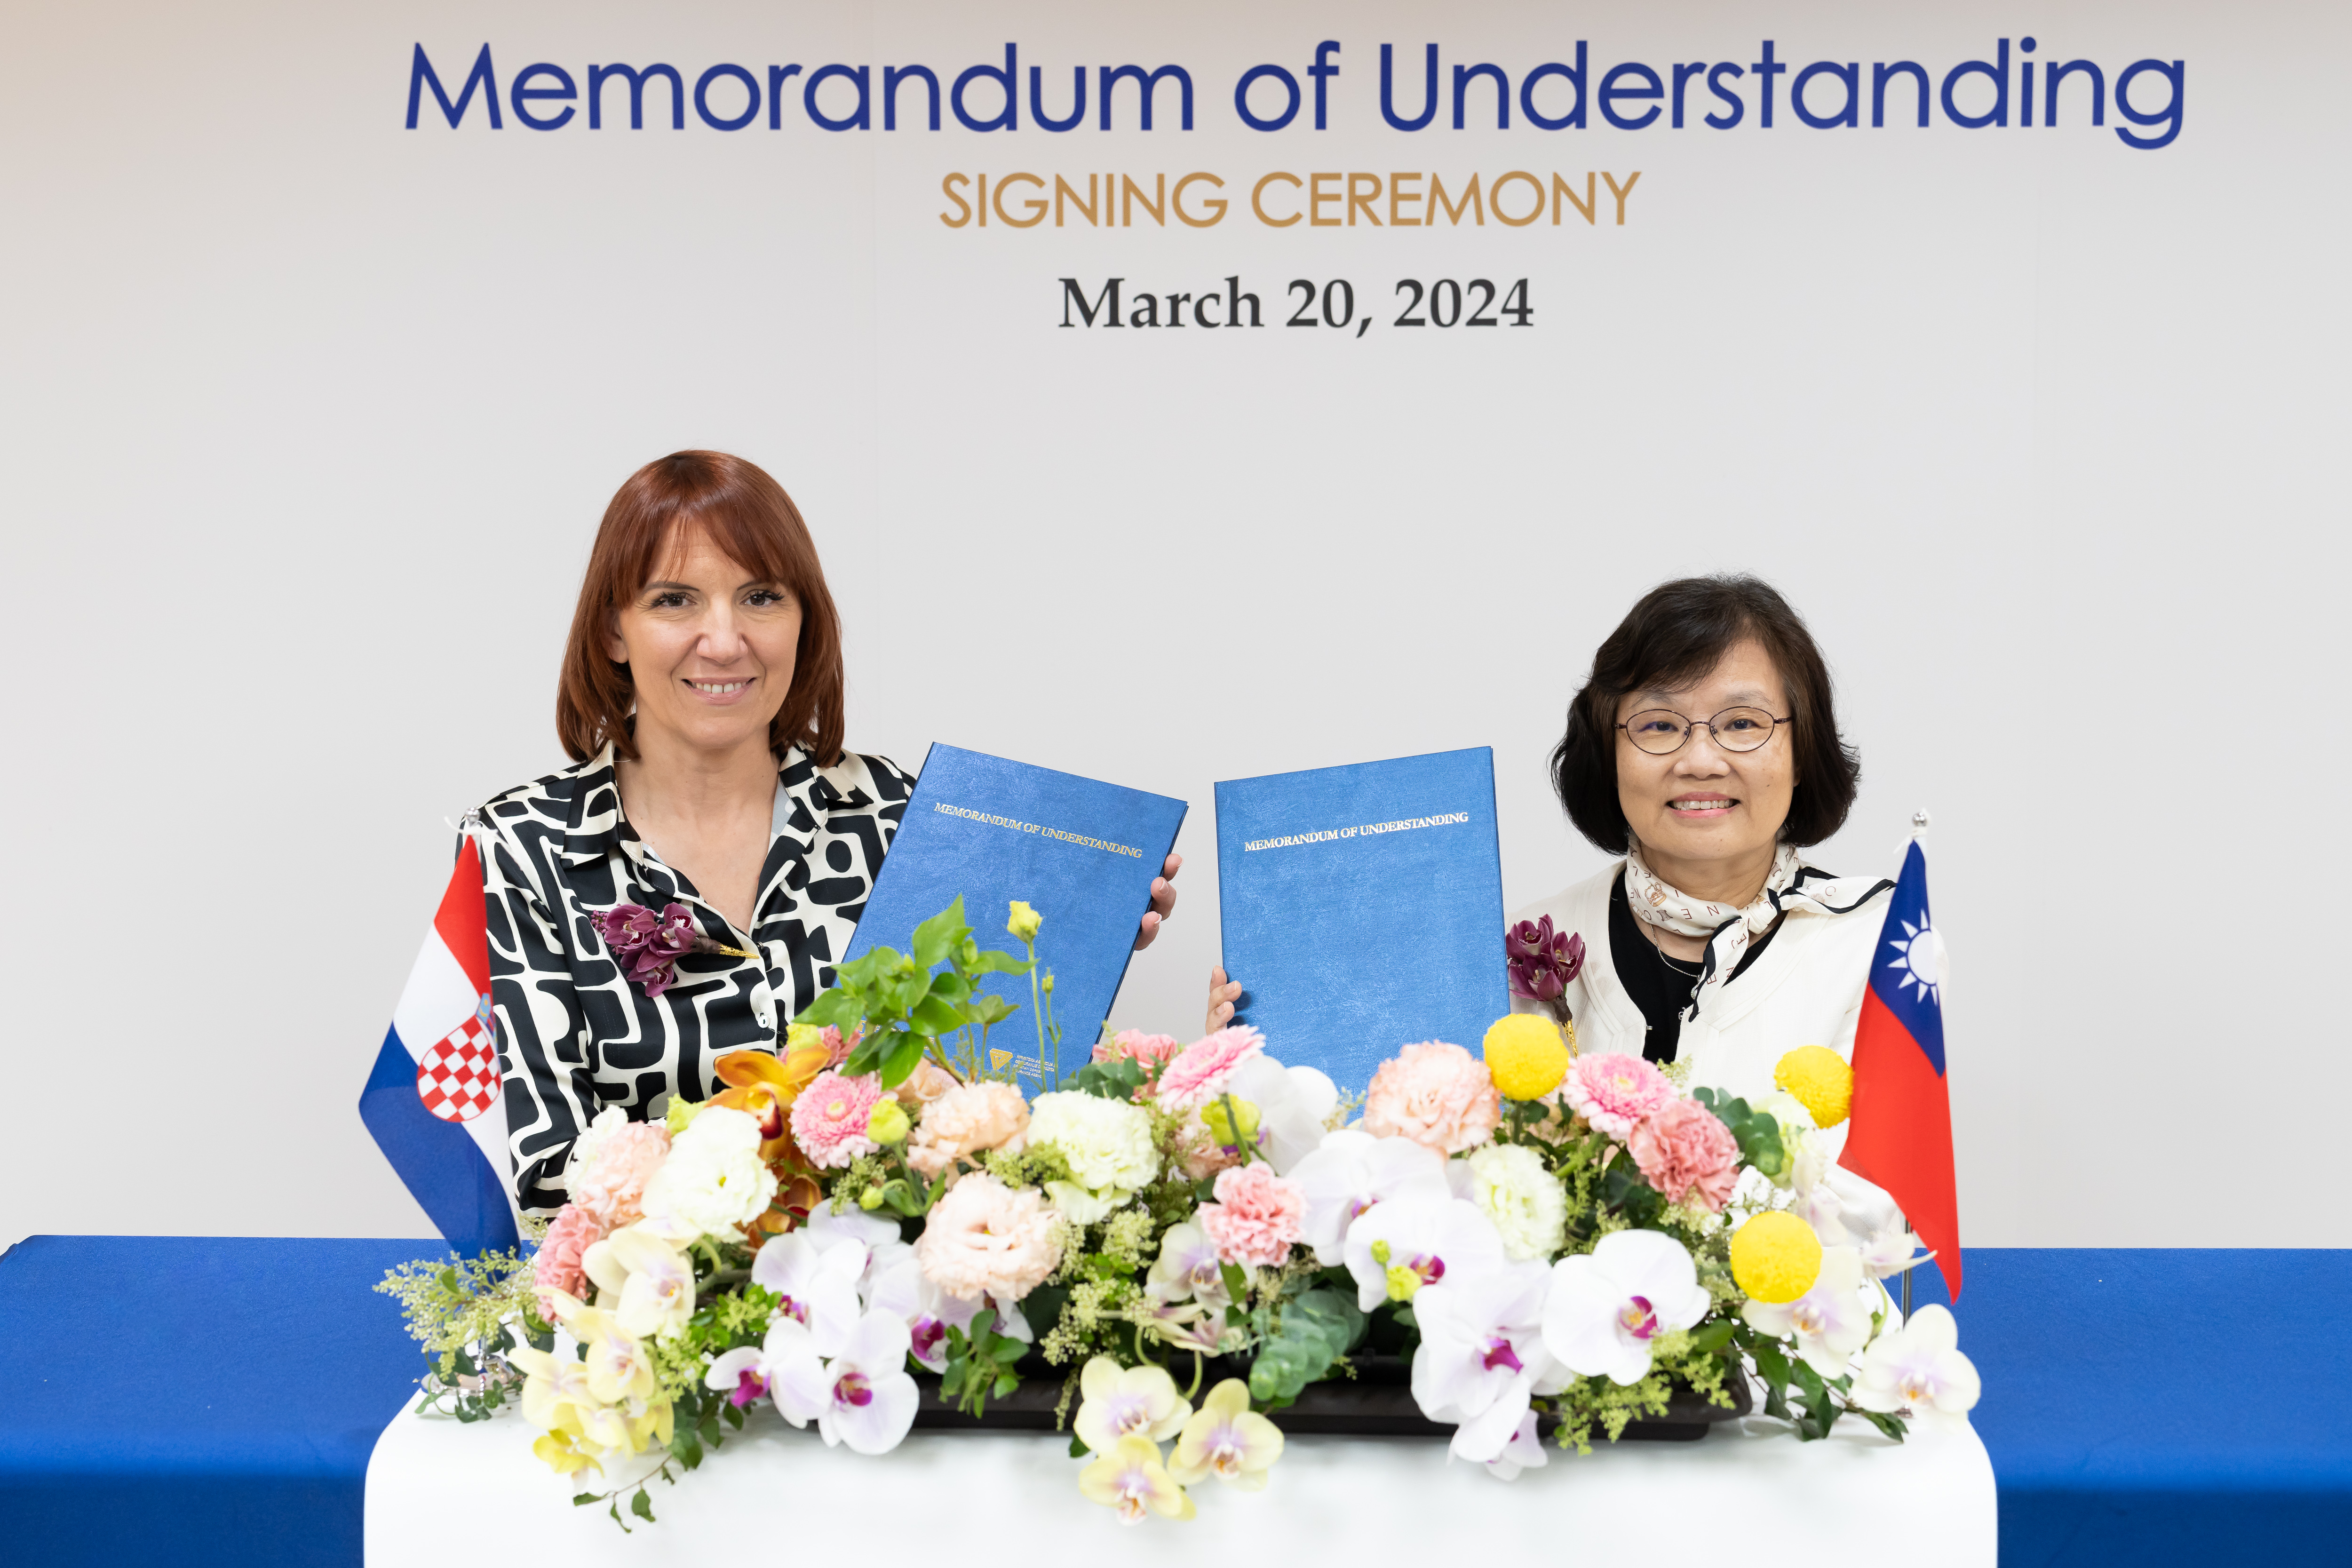 CDIC President Annie Cheng and CDIA CEO Ms. Marija Hrebac represented the respective organizations to sign the MOU on 20 March 2024.